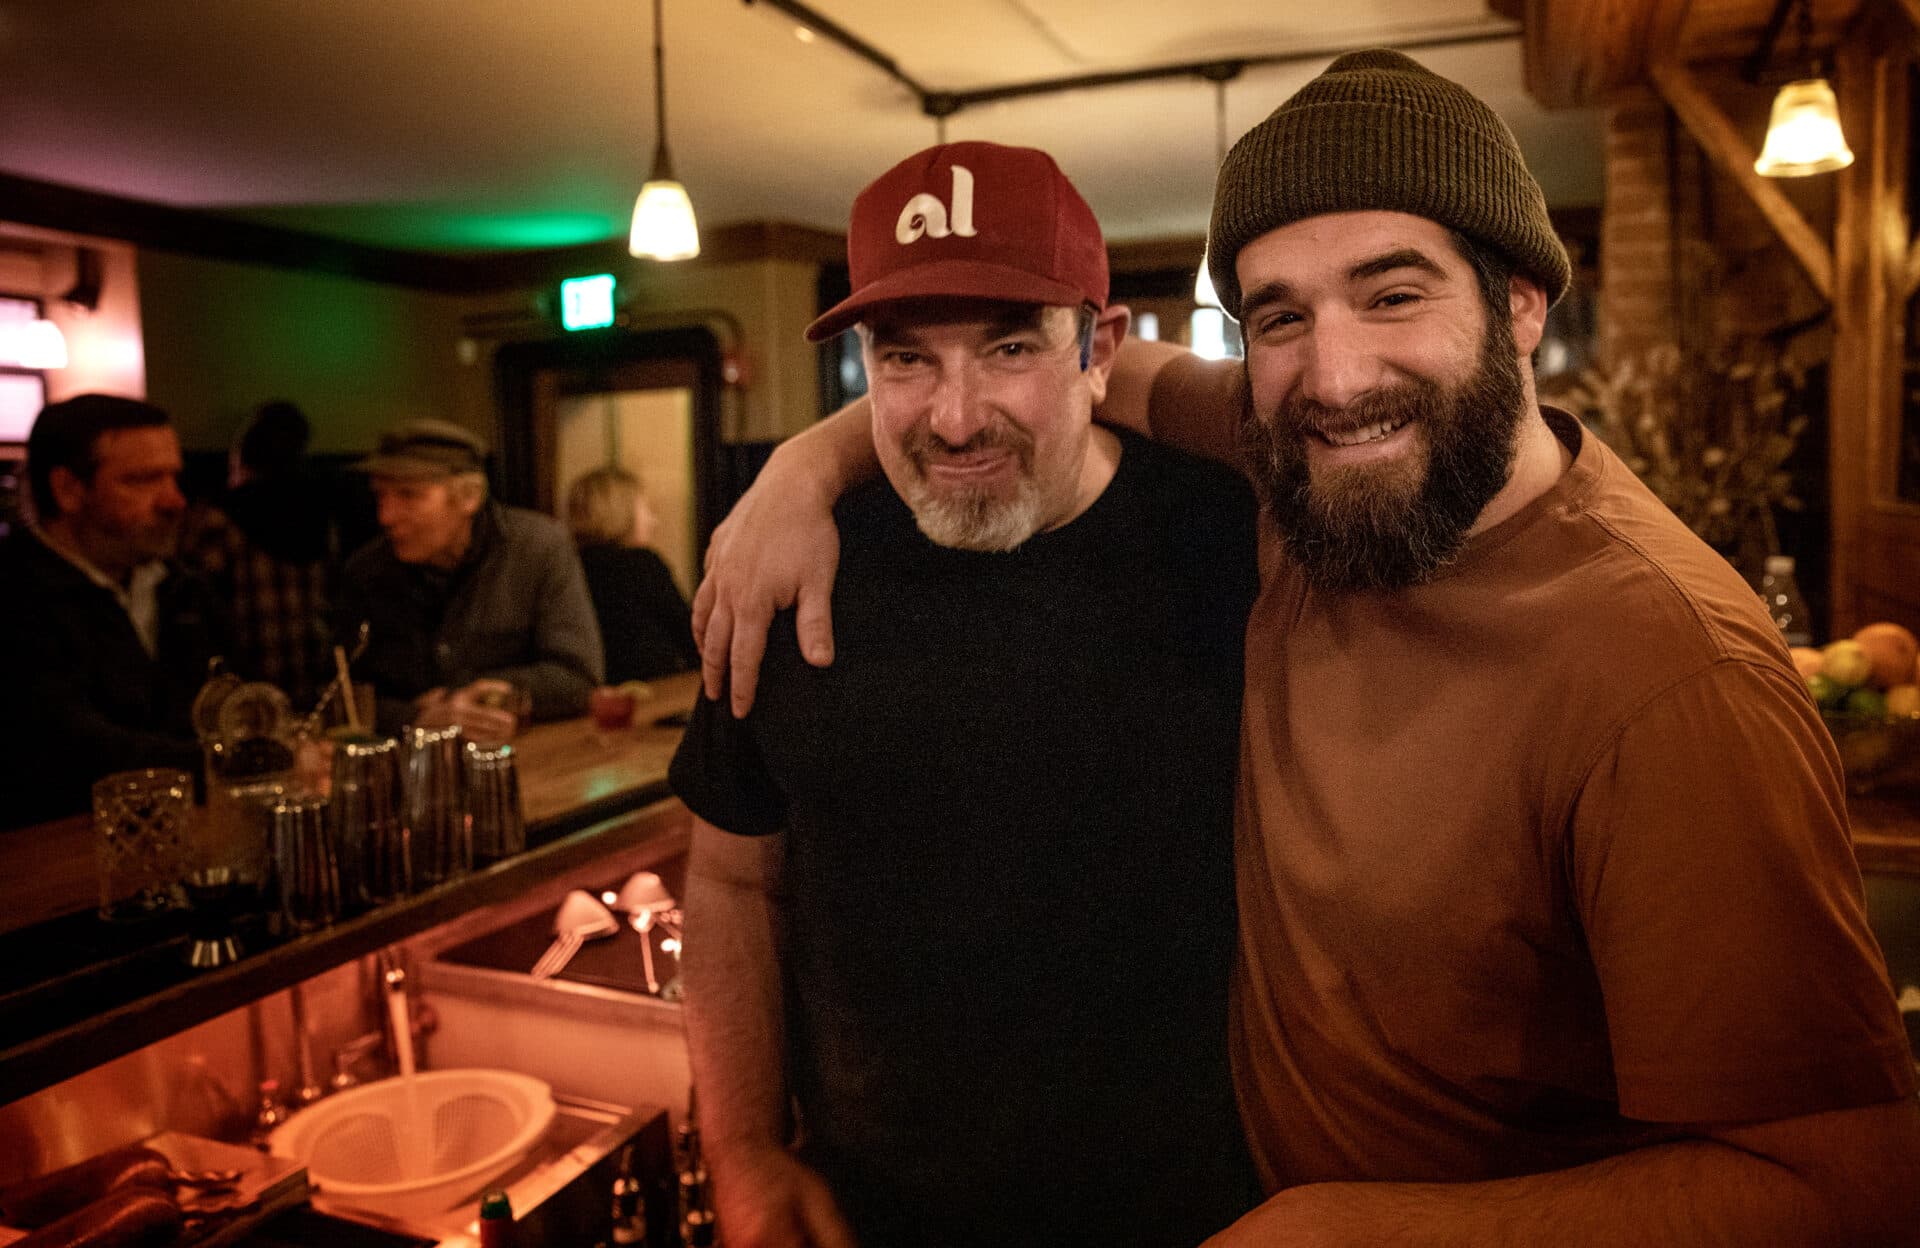 Barman Liam Davenport and manager Alexander Sirigu pause for a photo on a busy evening at Atwood's in Cambridge. (Robin Lubbock/WBUR)